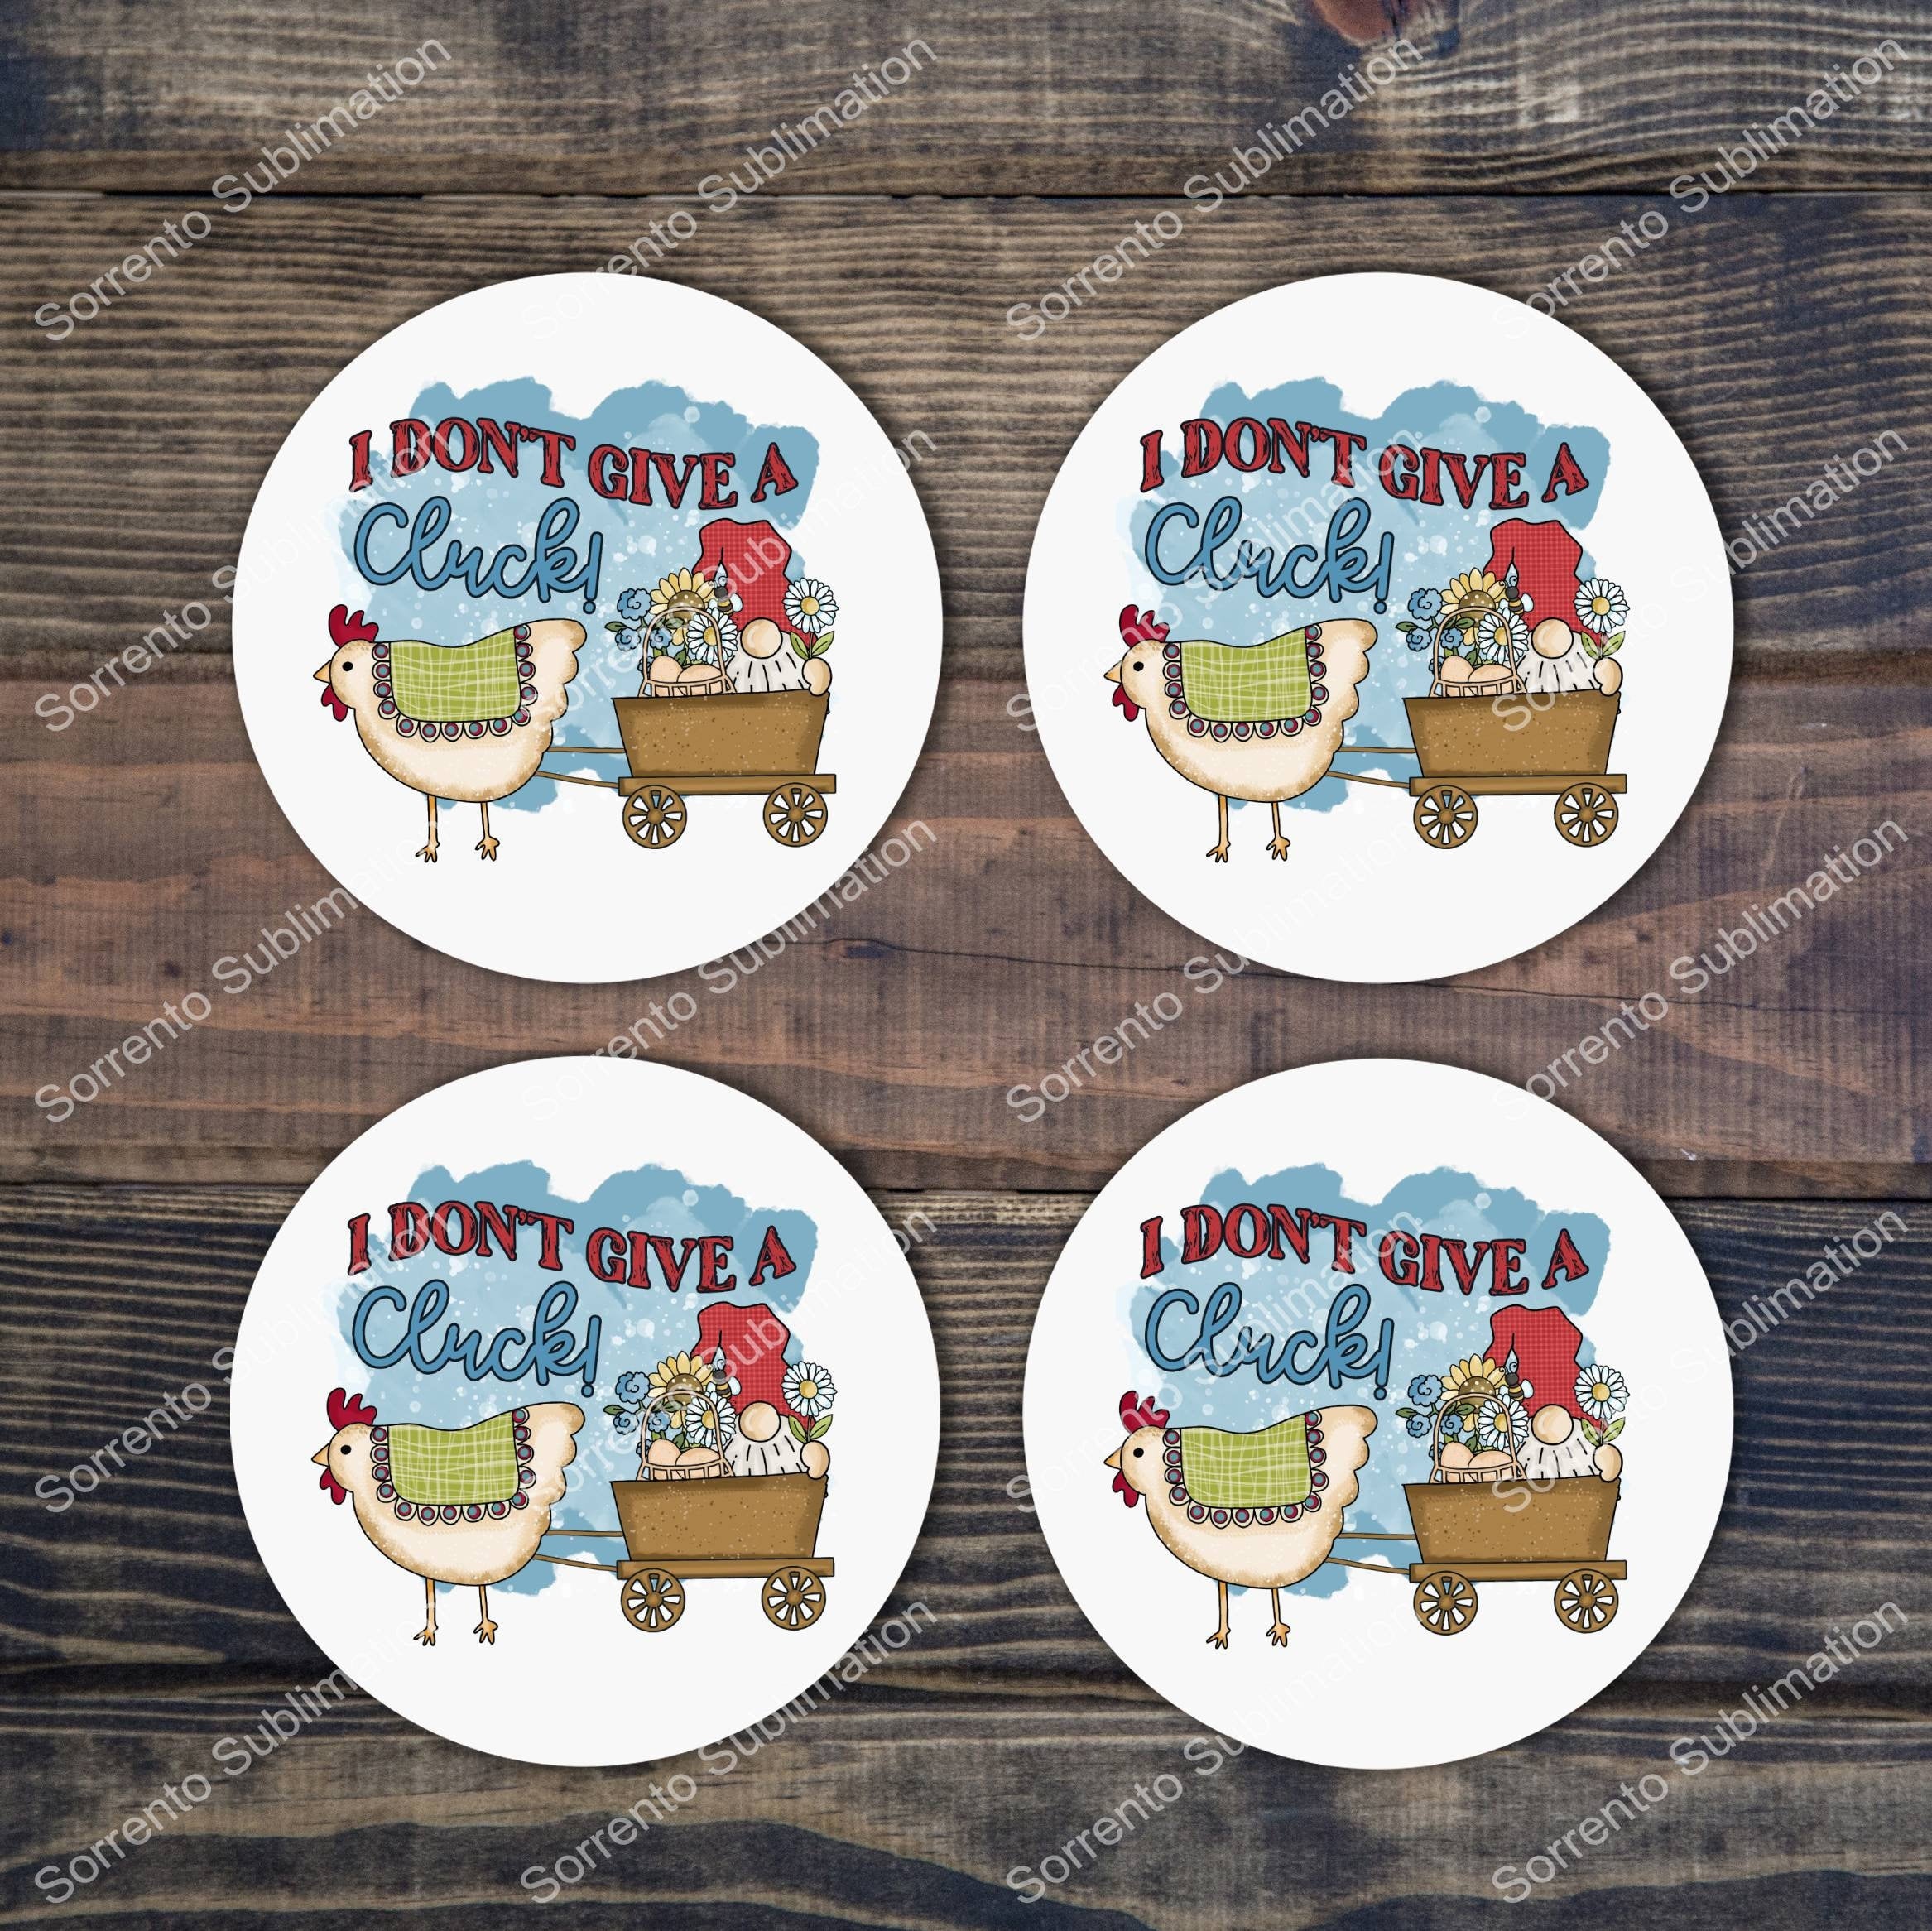 Chicken & gnome coaster - i don't give a cluck. cute chicken funny home decor, protect your furniture! cute coaster. mom(set of 4 or single)